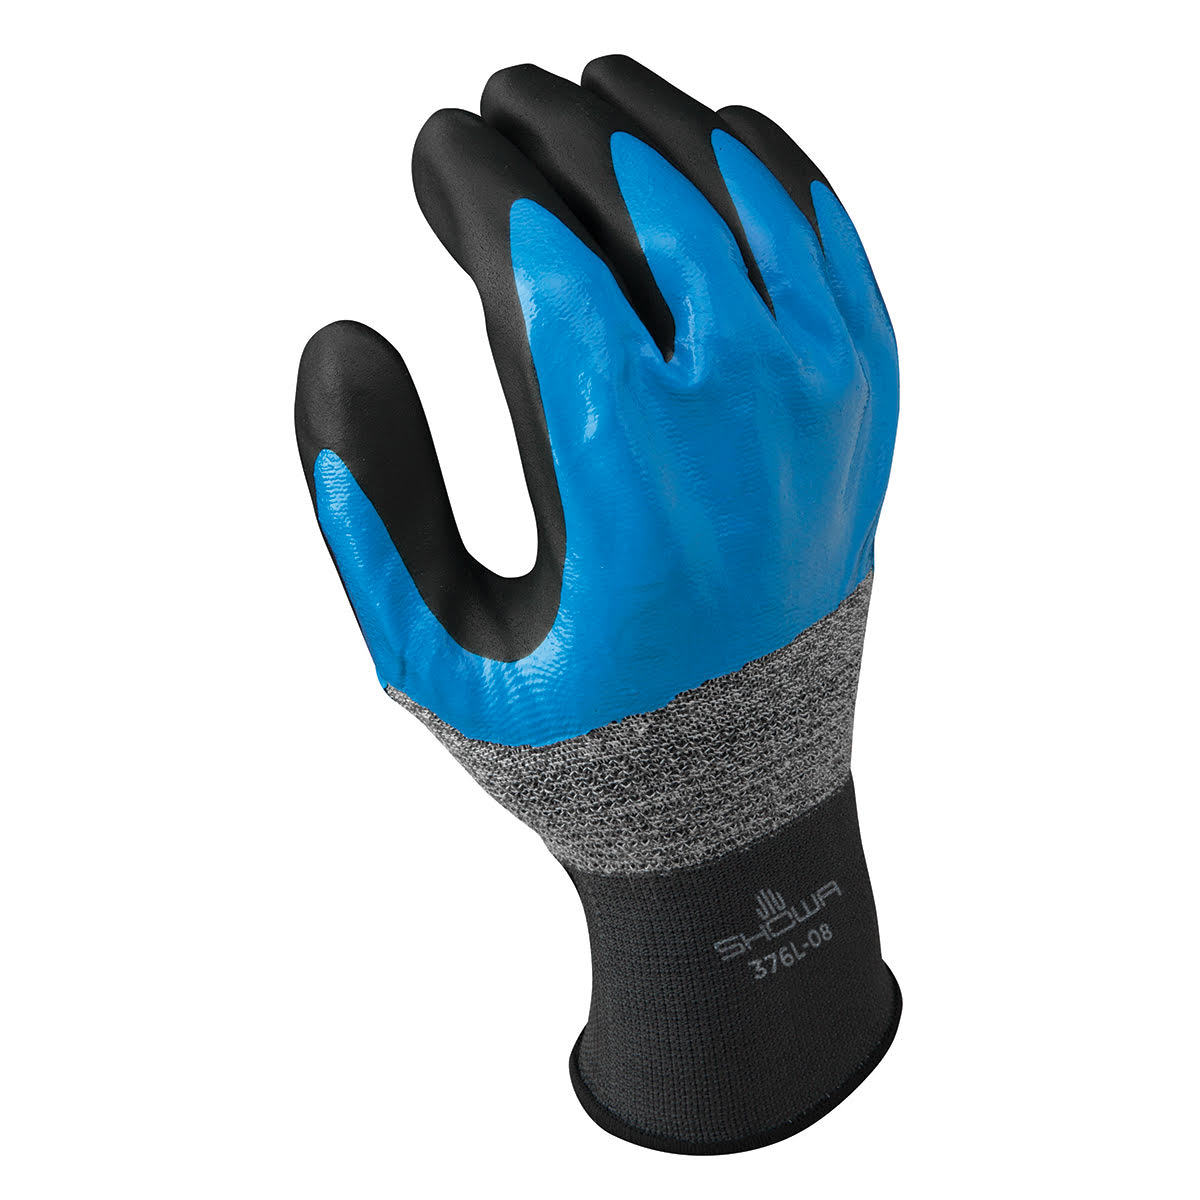 SHOWA® Size 8 13 Gauge Foam Nitrile Full Hand Coated Work Gloves With Knit Liner And Knit Wrist